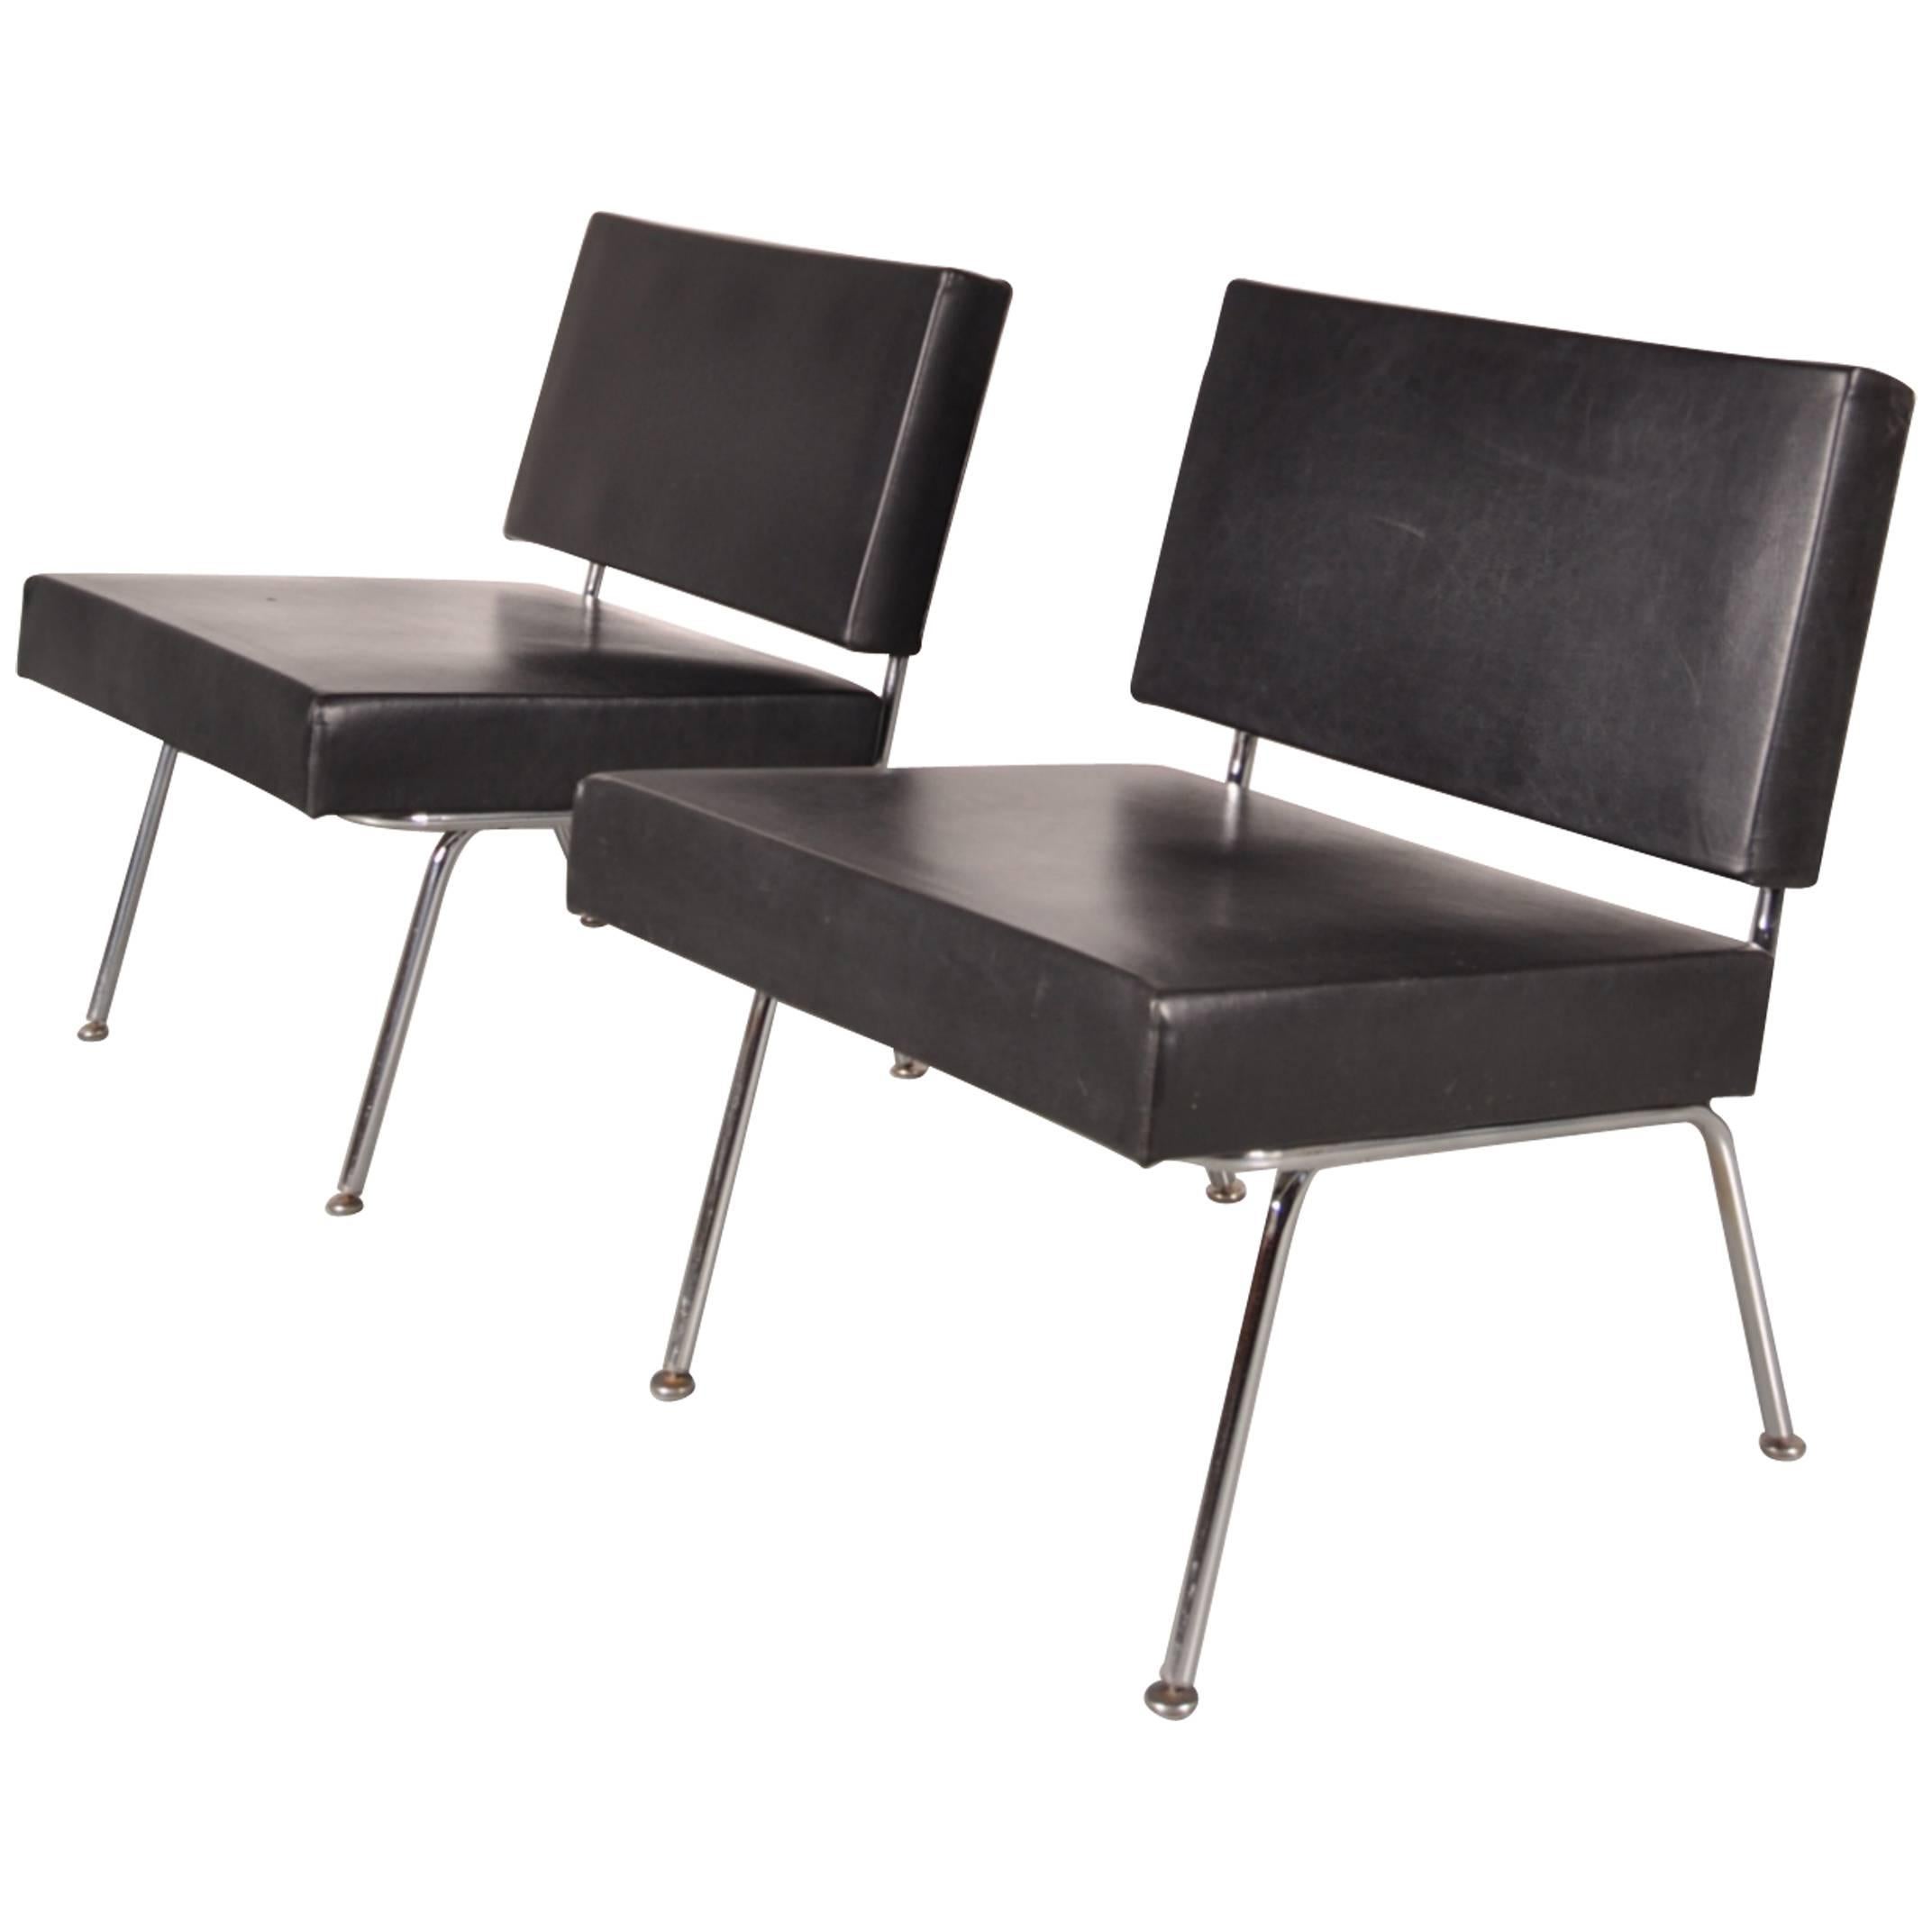 Set of Two Model 31 Easy Chairs by Florence Knoll for Knoll Int., circa 1960